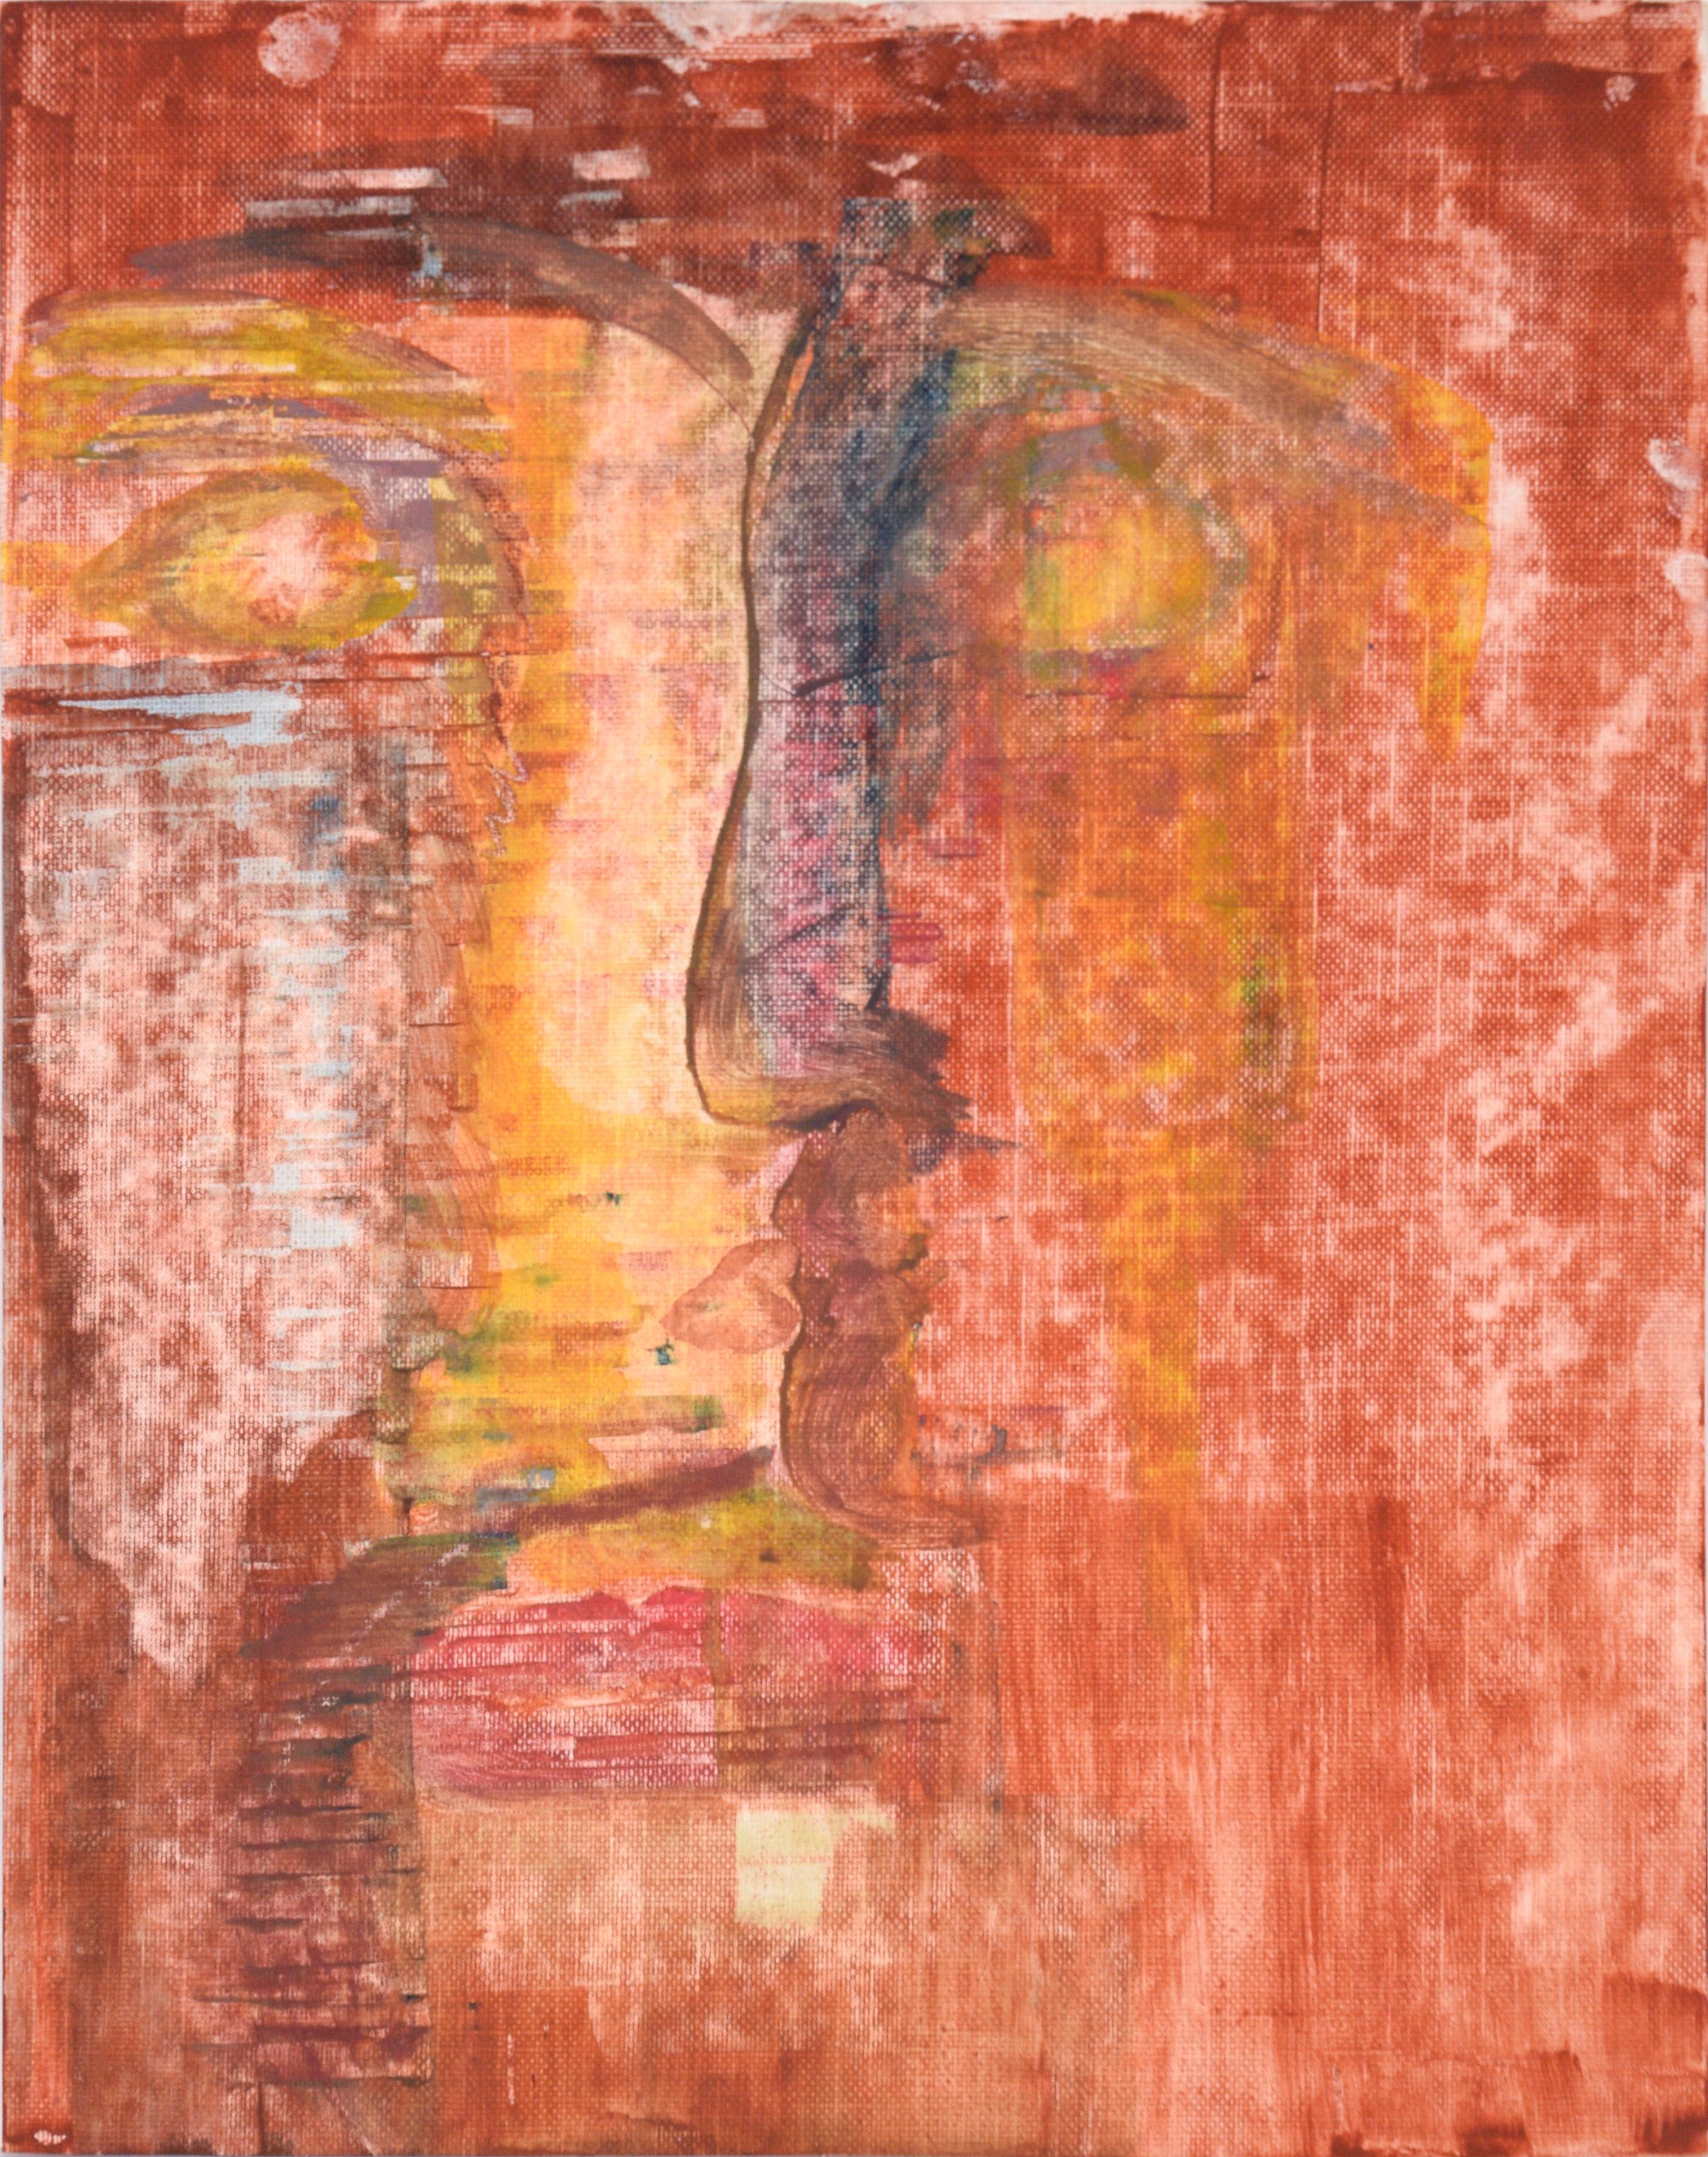 Stone Faces Buddha - Abstract Portrait in Acrylic on Textured Paper